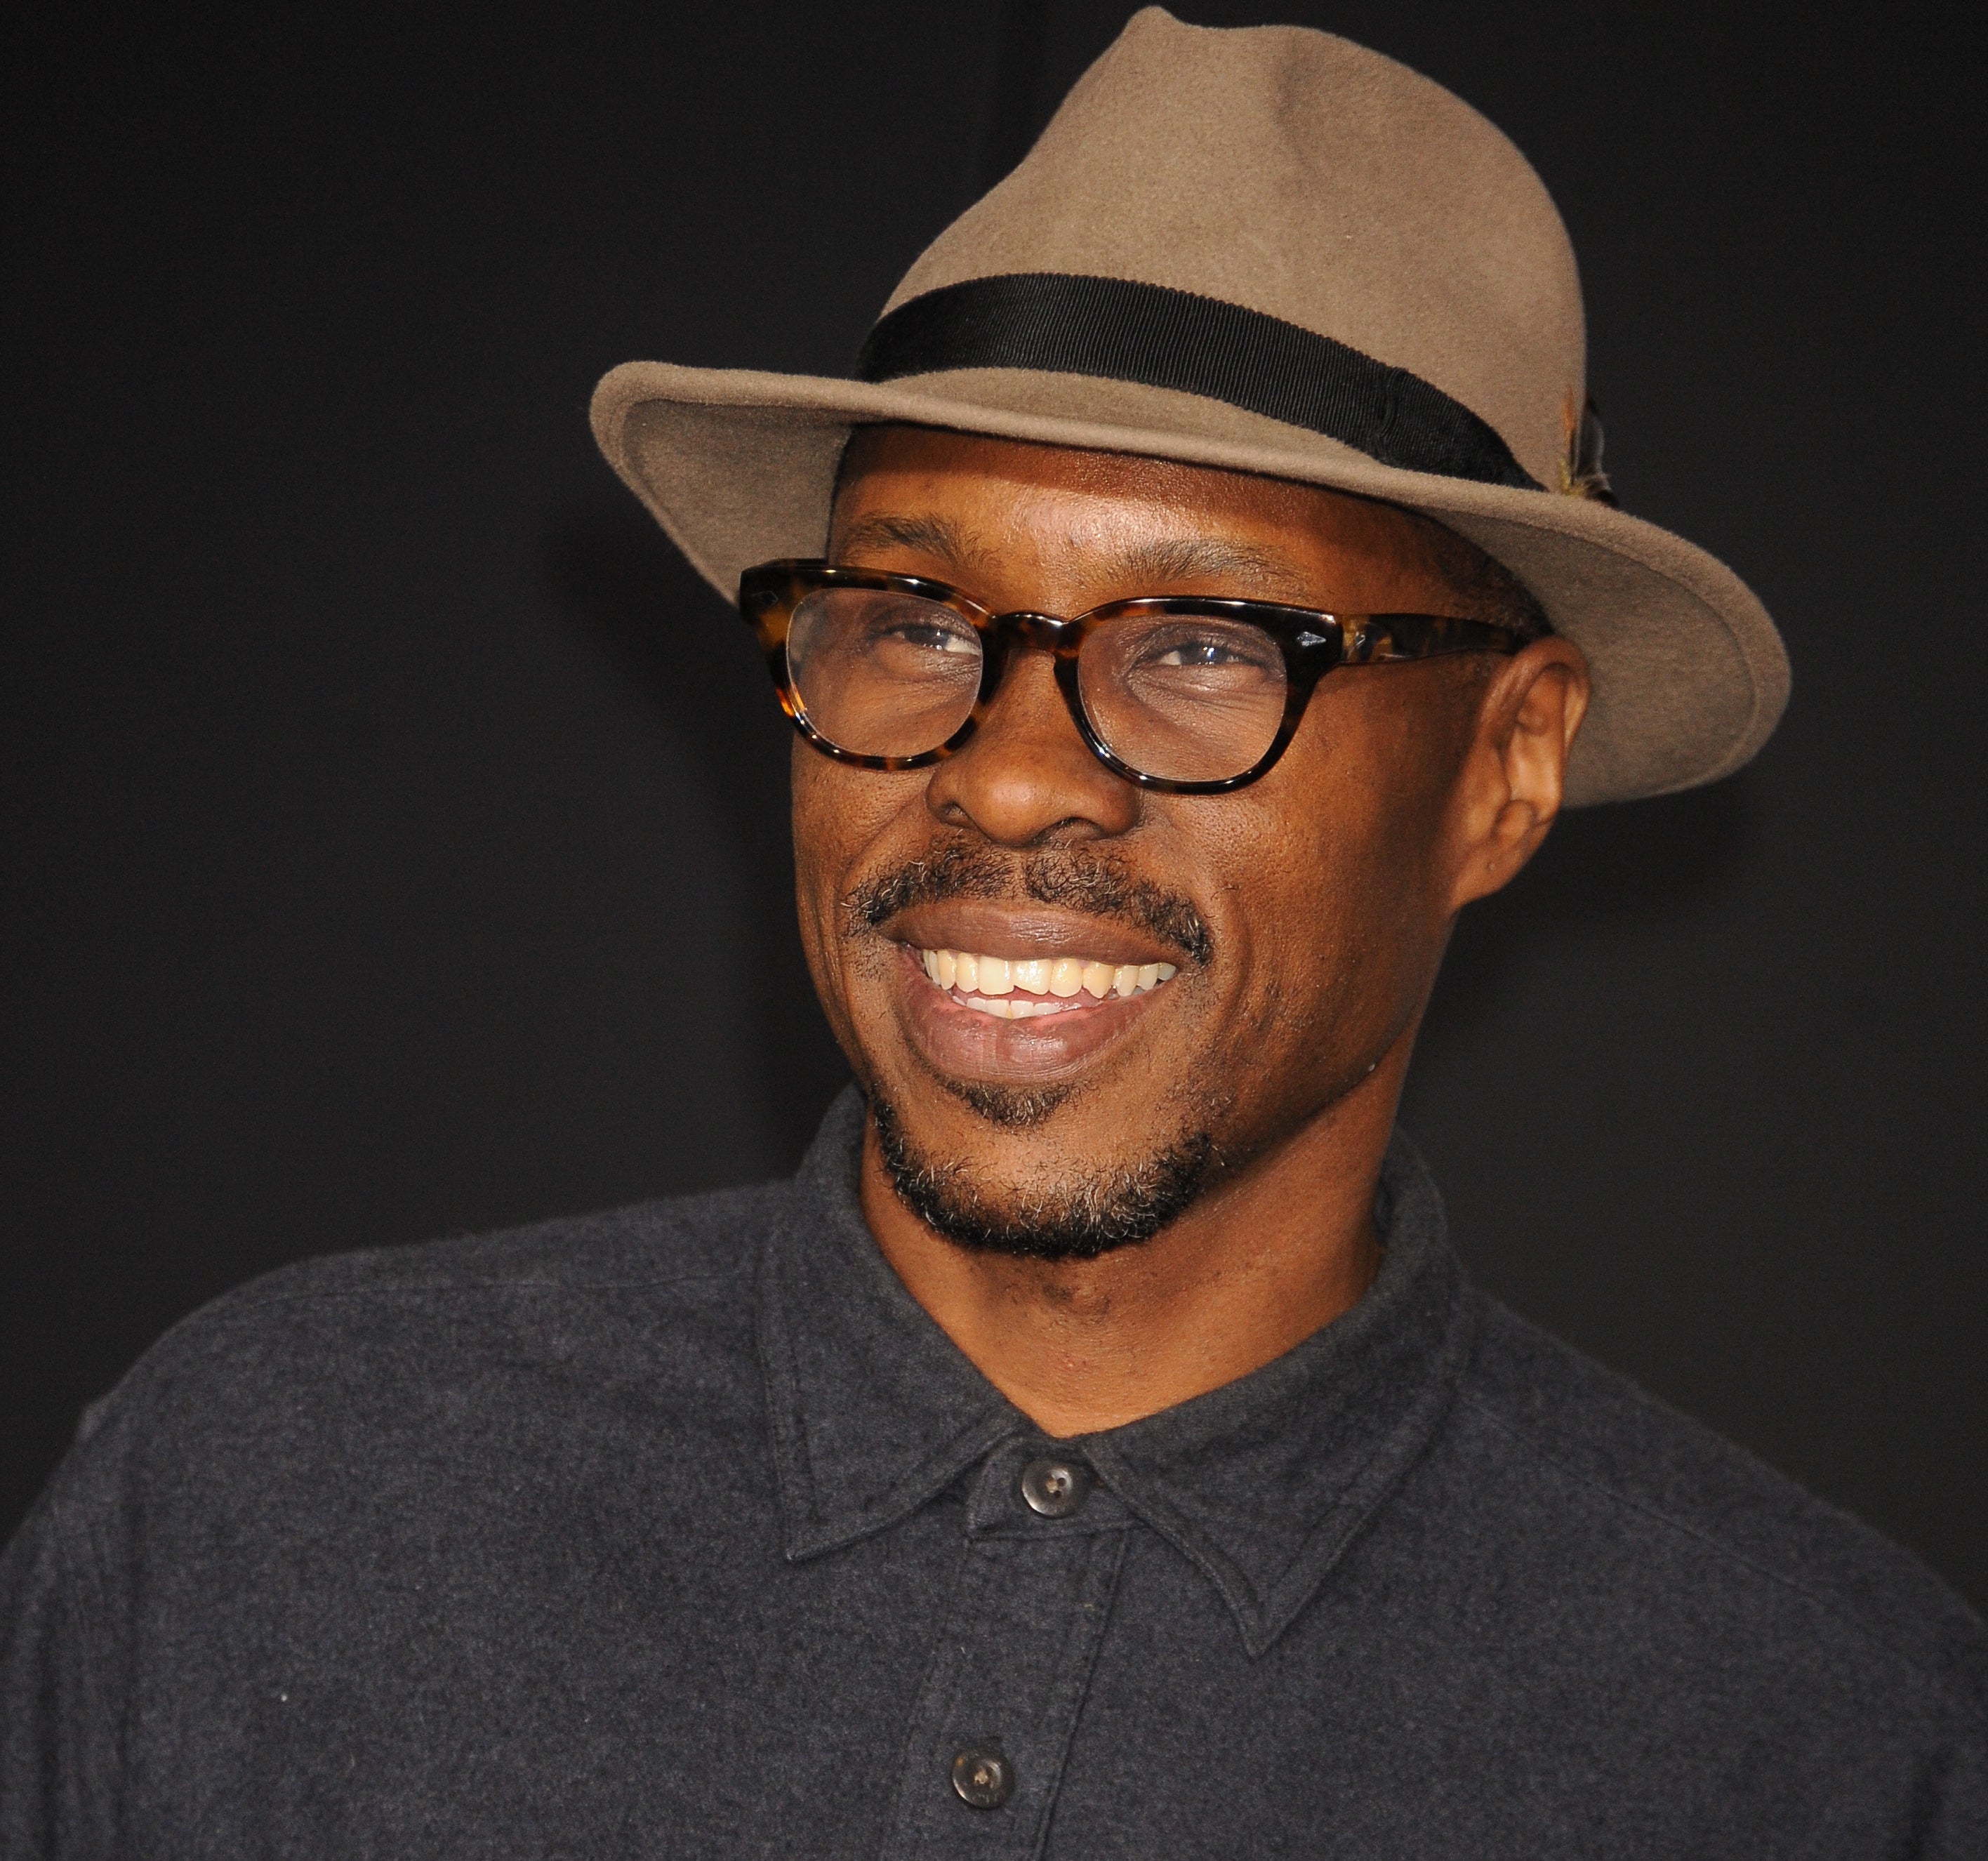 Wood Harris at an event